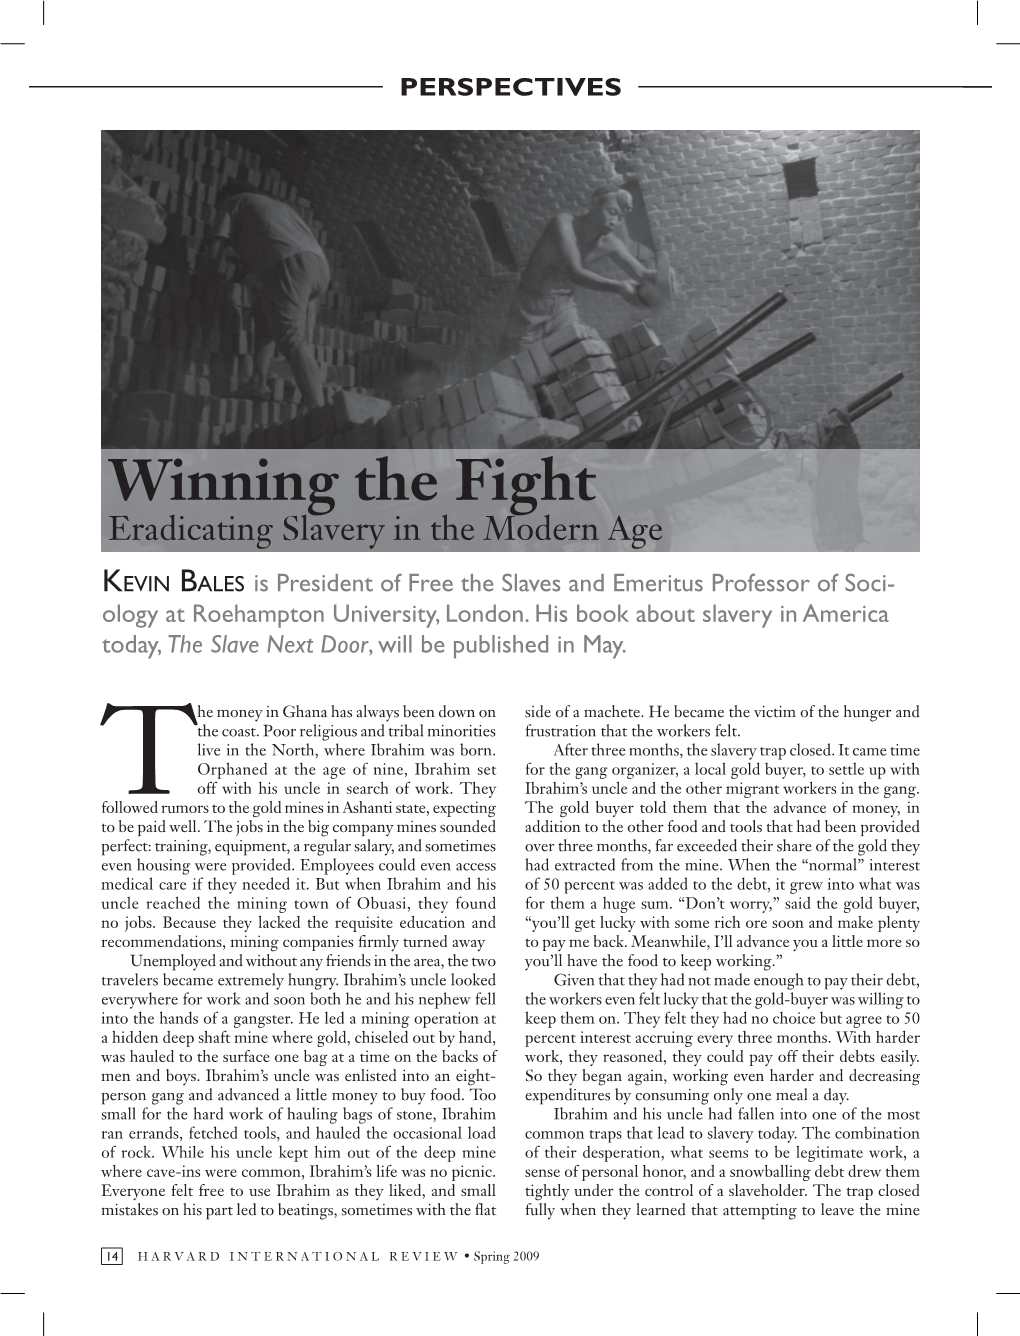 Winning the Fight Eradicating Slavery in the Modern Age